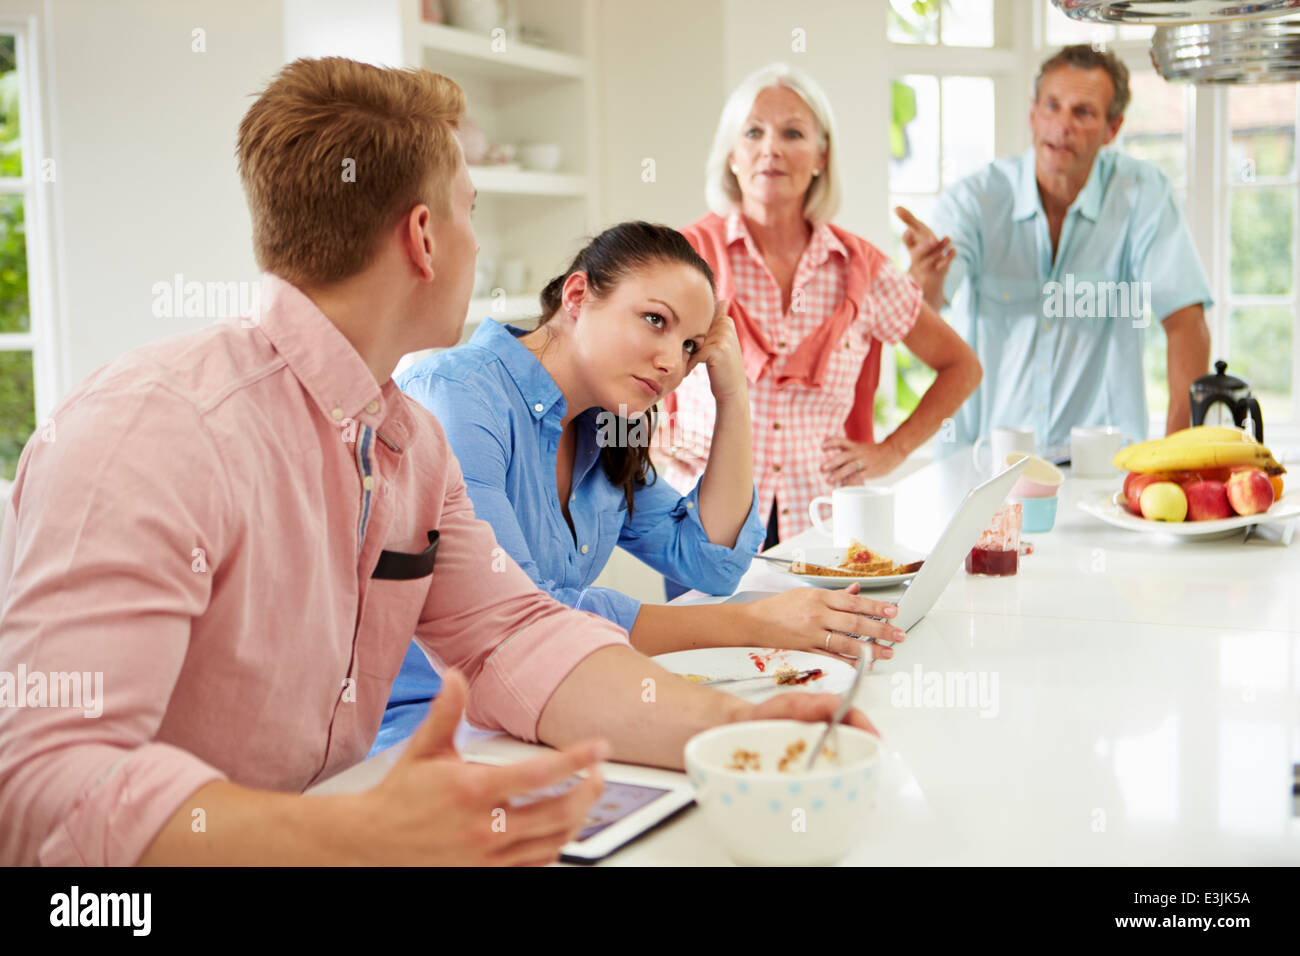 Family With Adult Children Having Argument At Breakfast Stock Photo